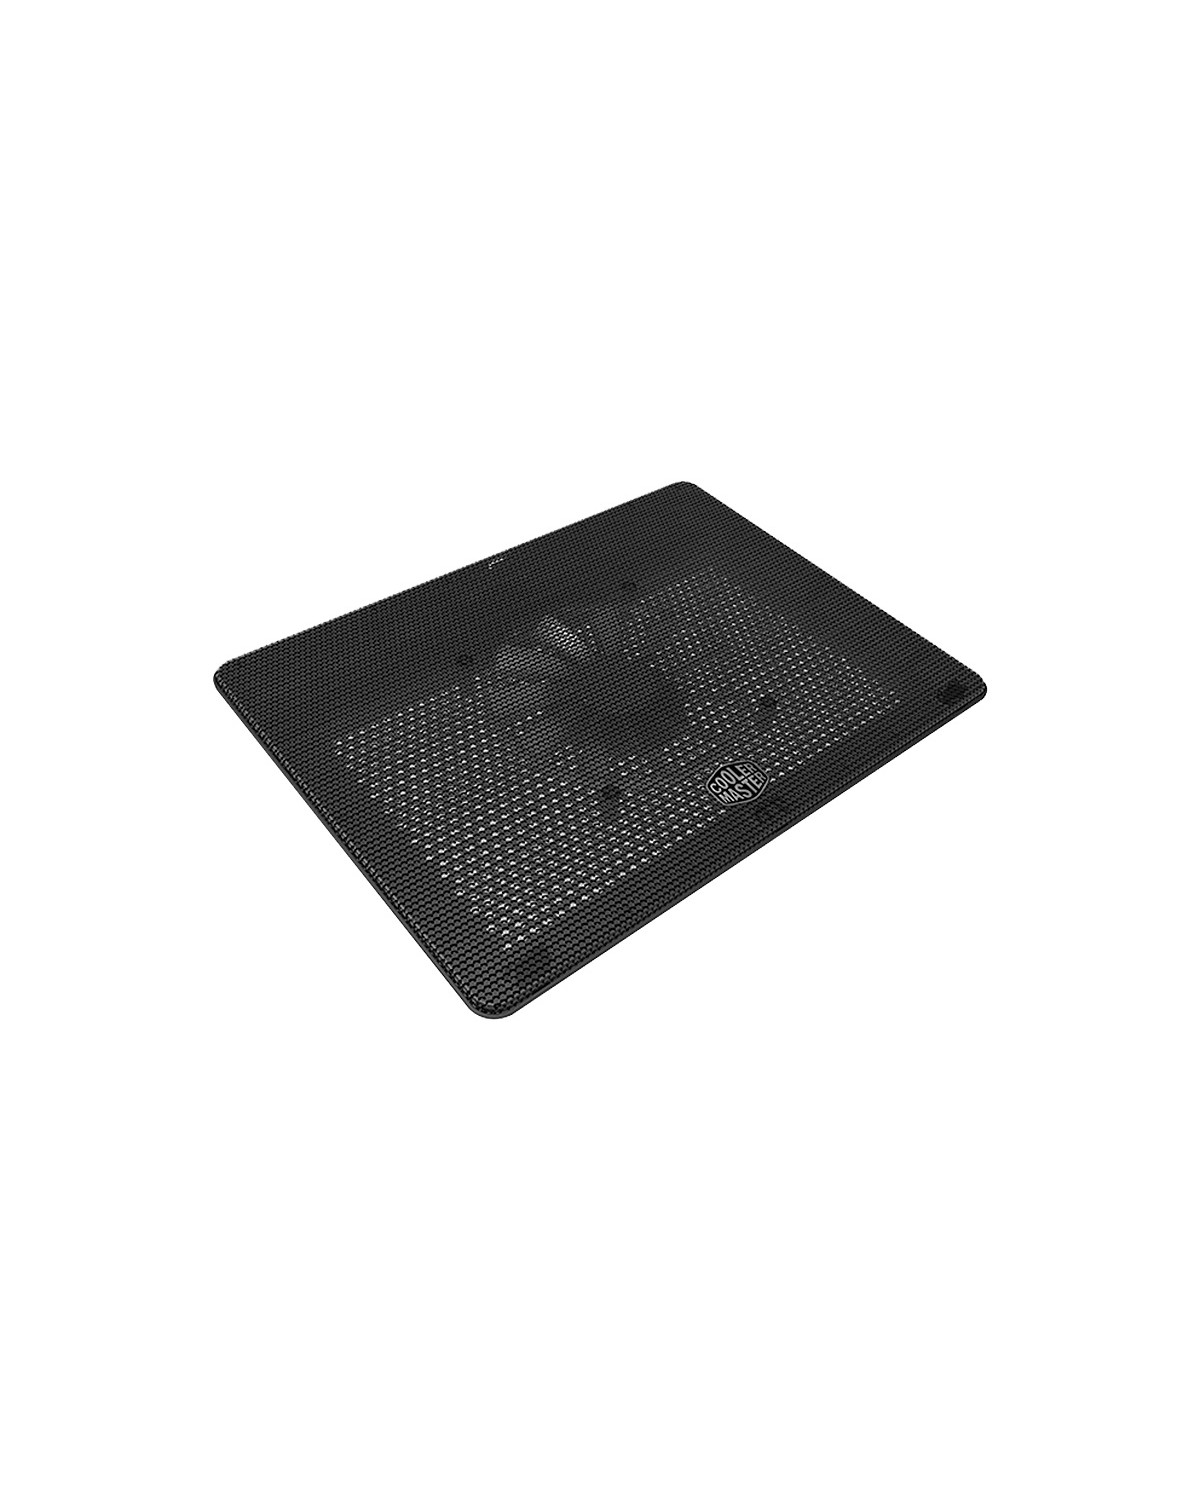 BASE PARA NOTEBOOK NOTEPAL L2 FAN 160MM LED AZUL UBS 2.0 - MNW-SWTS-14FN-R1